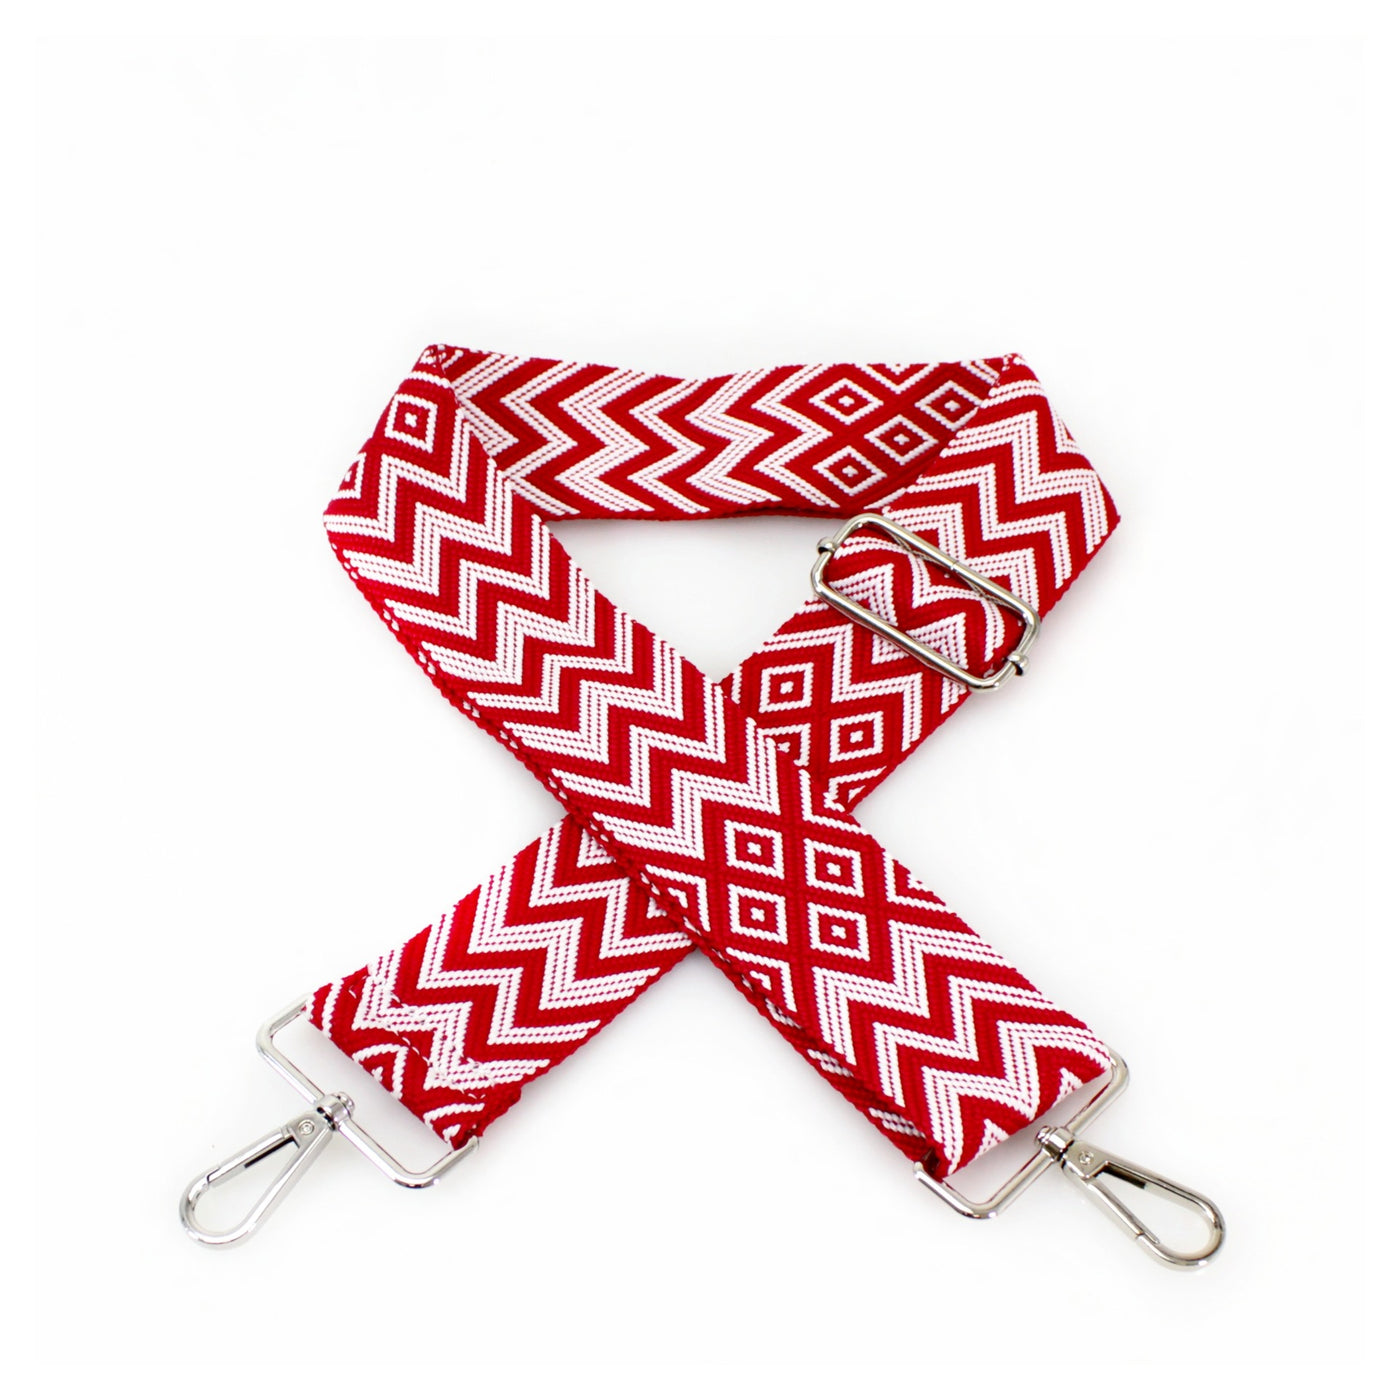 Chevron & Diamond Woven Bag Strap - Red/White with Silver Fittings